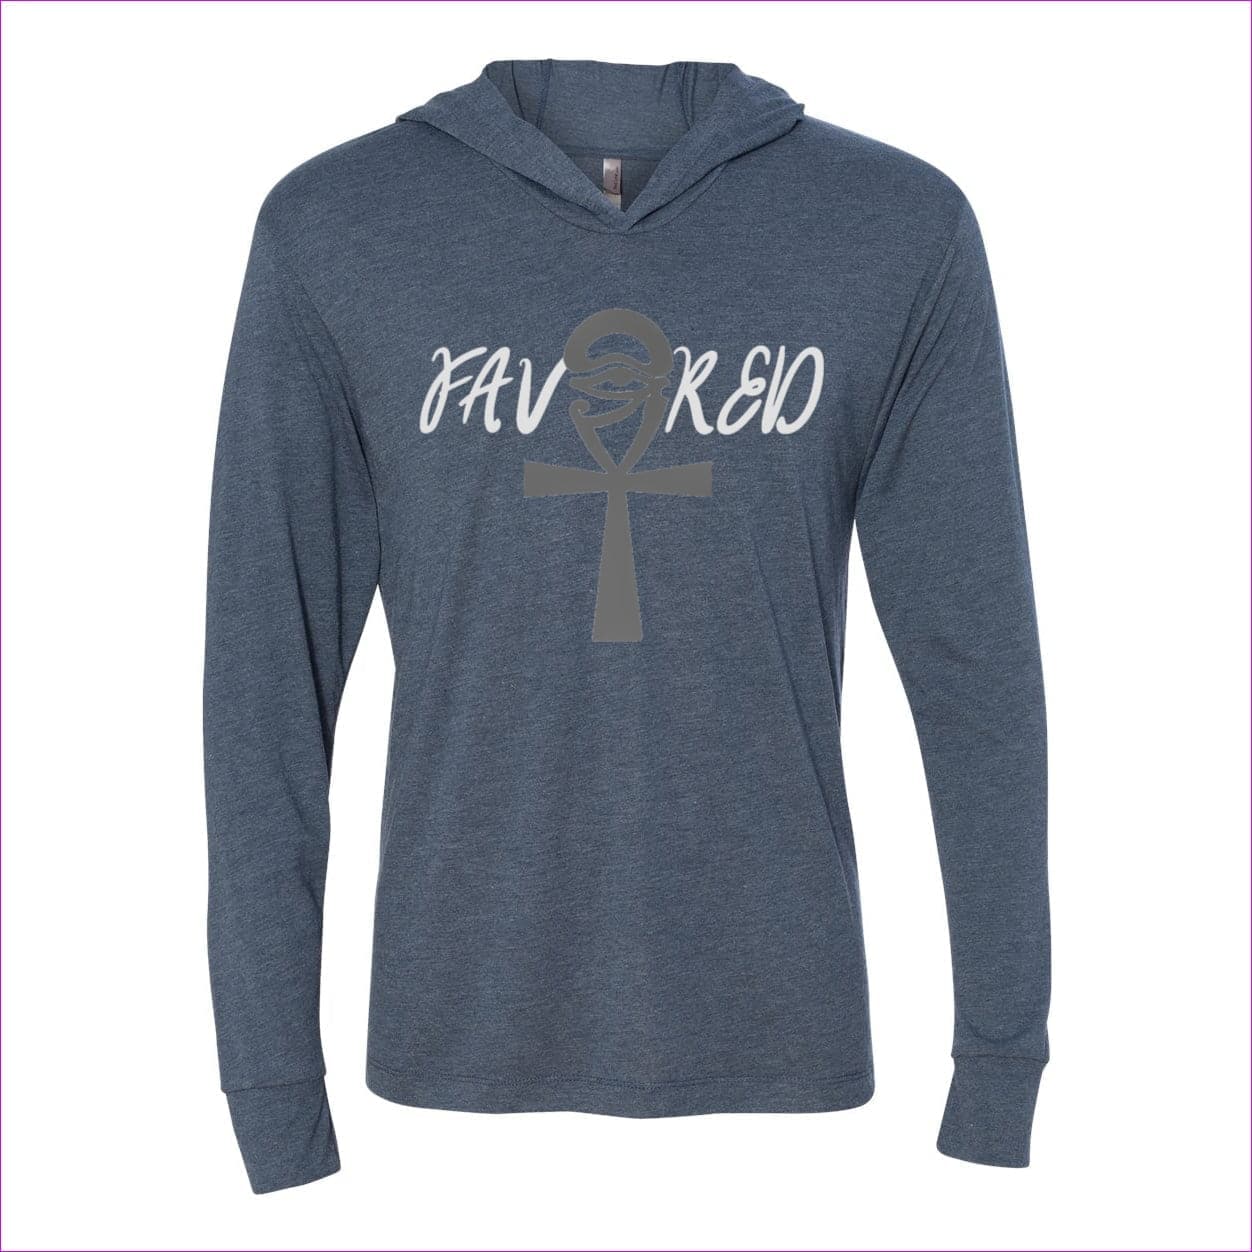 Indigo - Favored Womens Triblend Hooded Tee - womens hoodie at TFC&H Co.